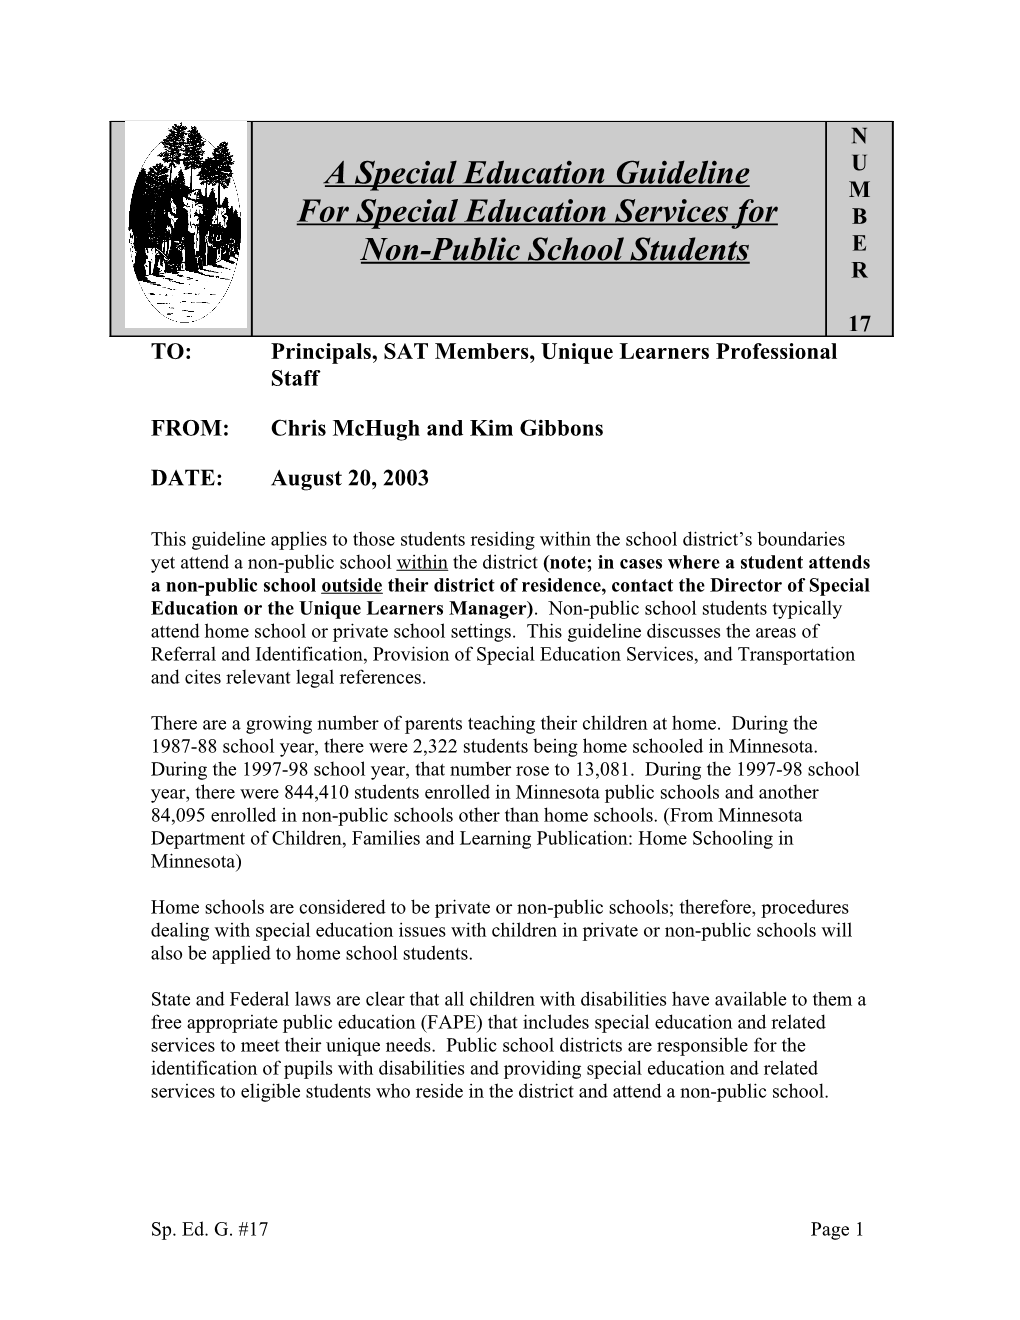 For Special Education Services for Non-Public School Students